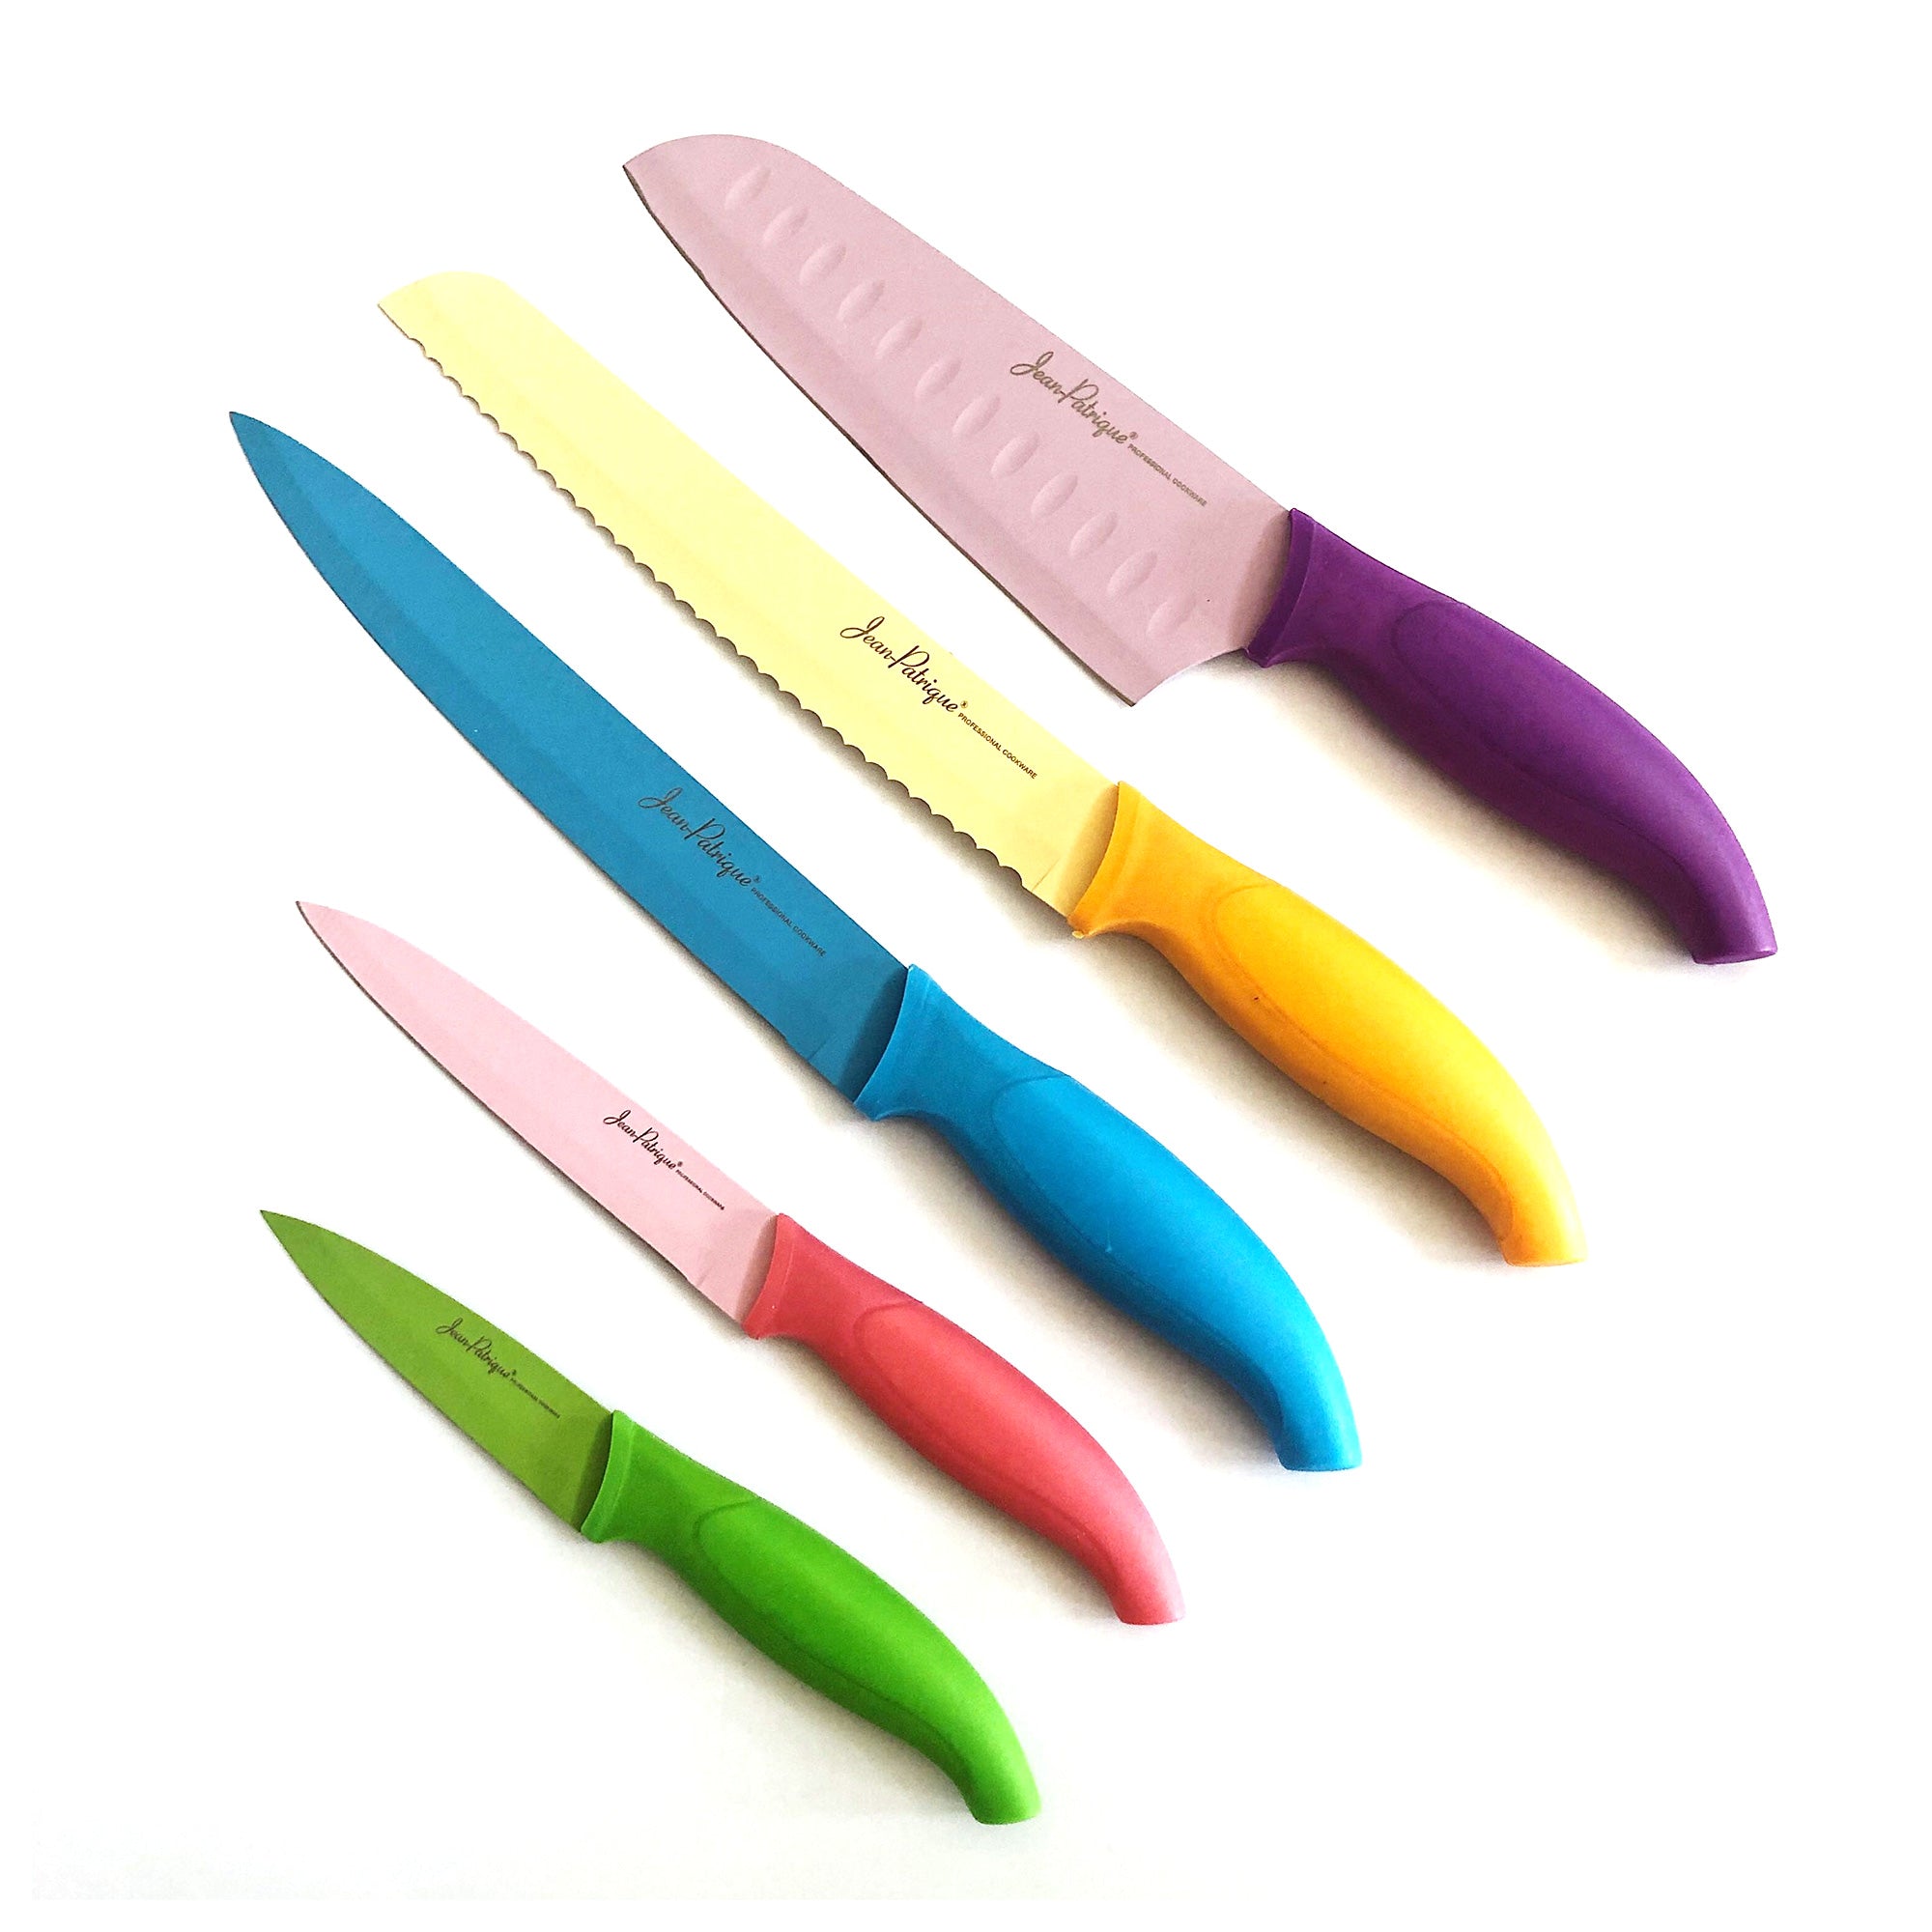 DT001 5 Pieces of Kitchen Knives Set - Non-Stick Coating Stainless